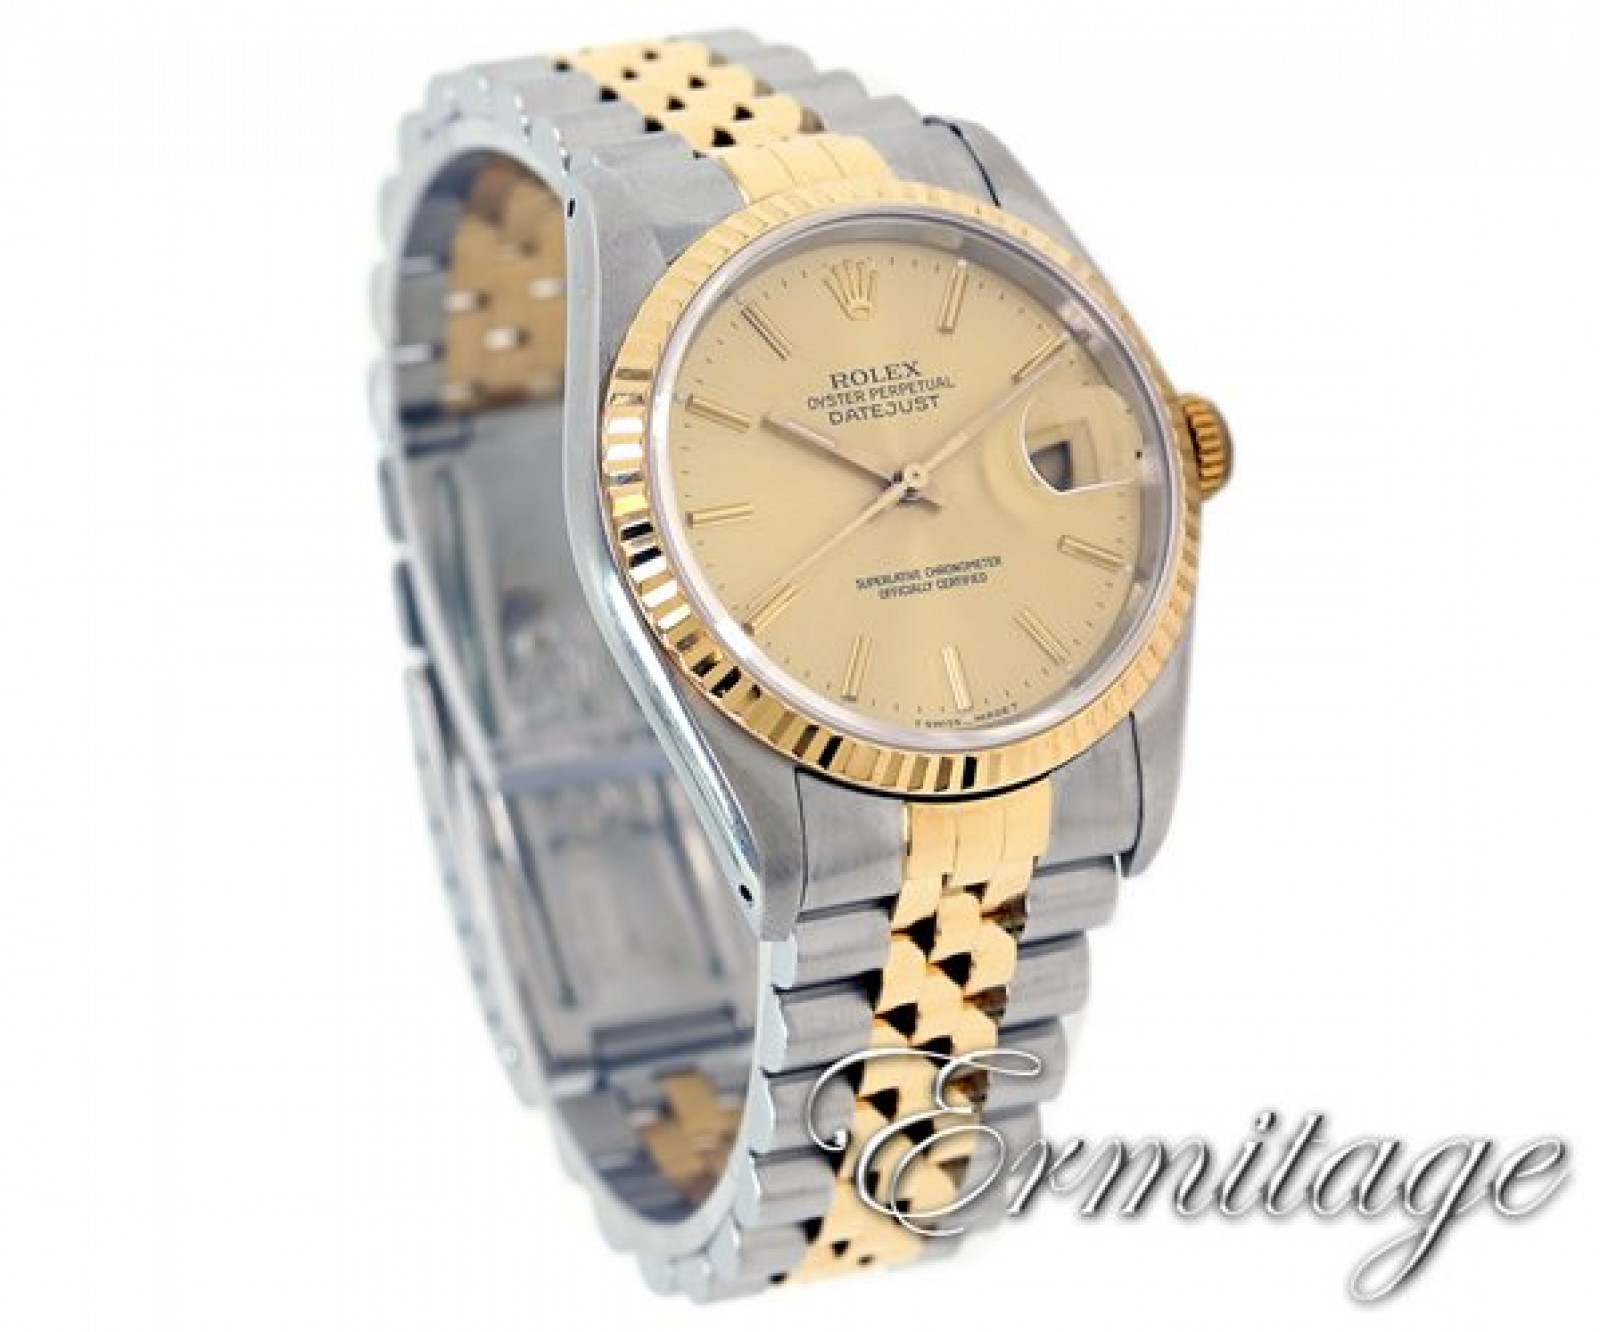 Selling Your Rolex Datejust 16233